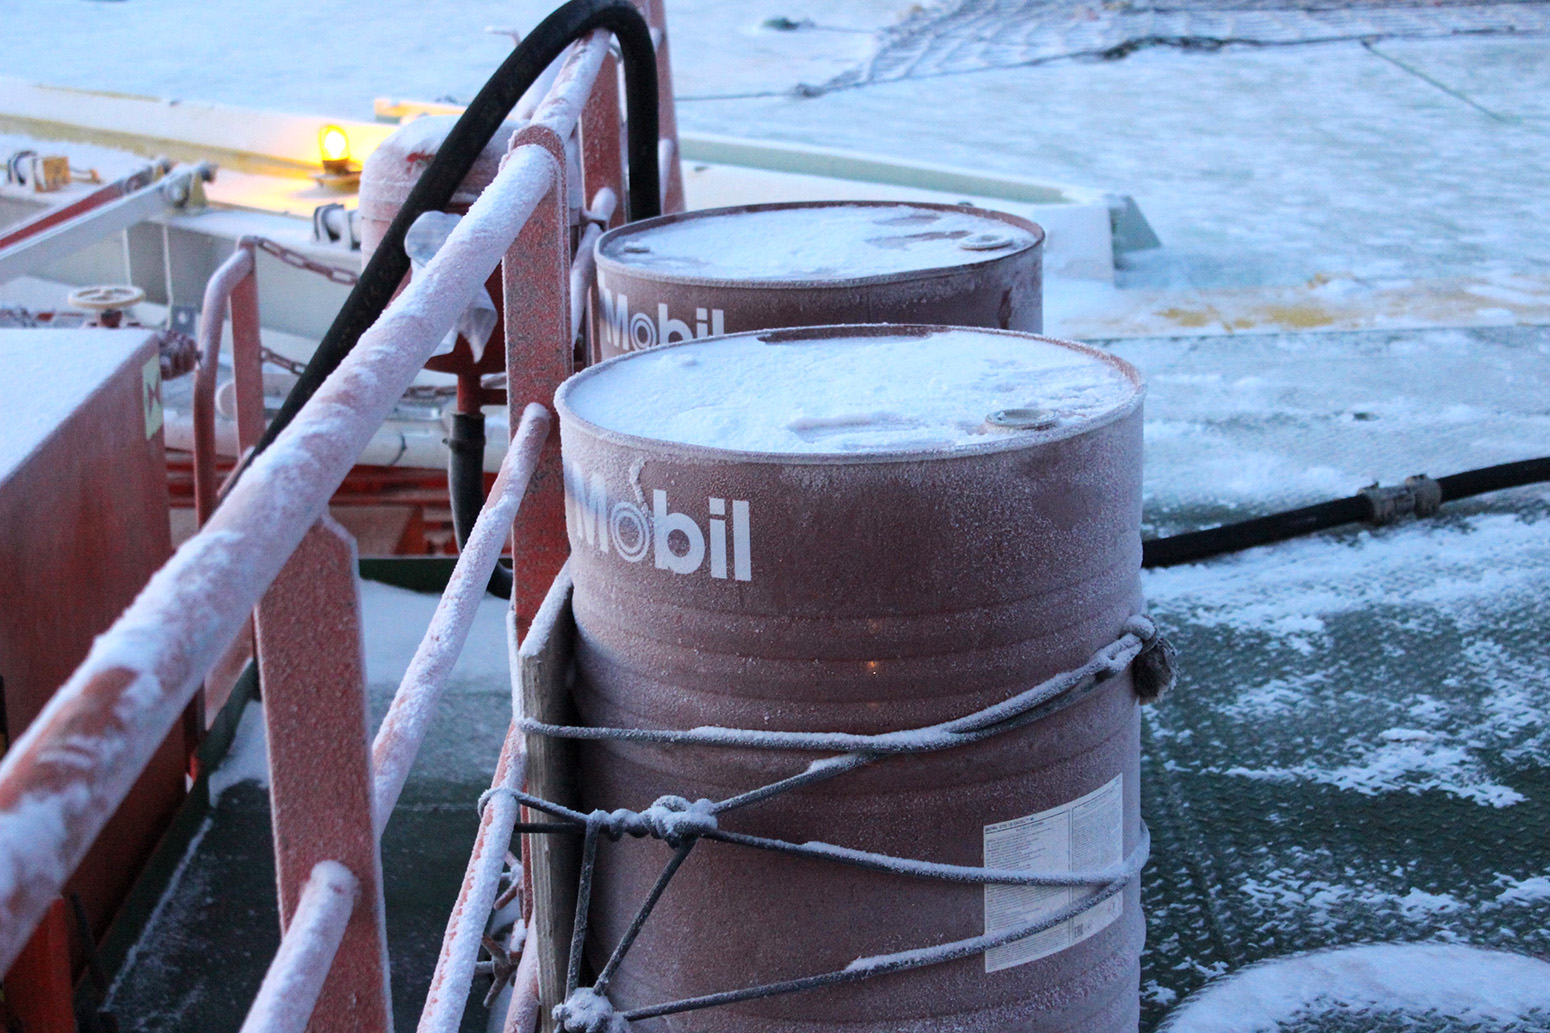 Cans of helicopter fuel on the helideck of the Akademik Fedorov.